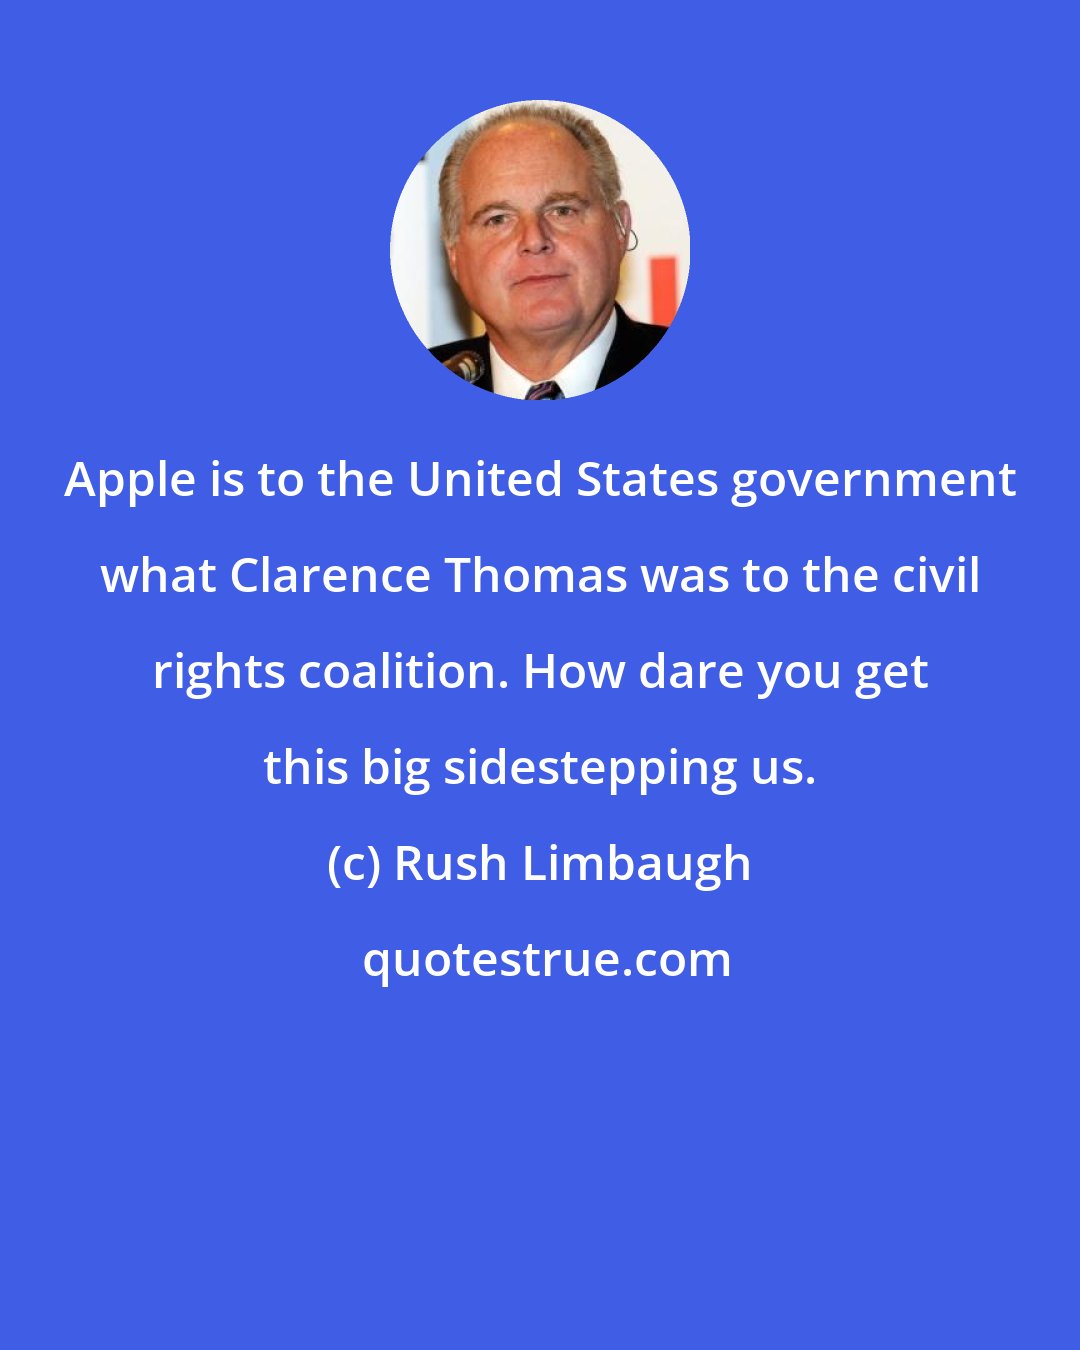 Rush Limbaugh: Apple is to the United States government what Clarence Thomas was to the civil rights coalition. How dare you get this big sidestepping us.